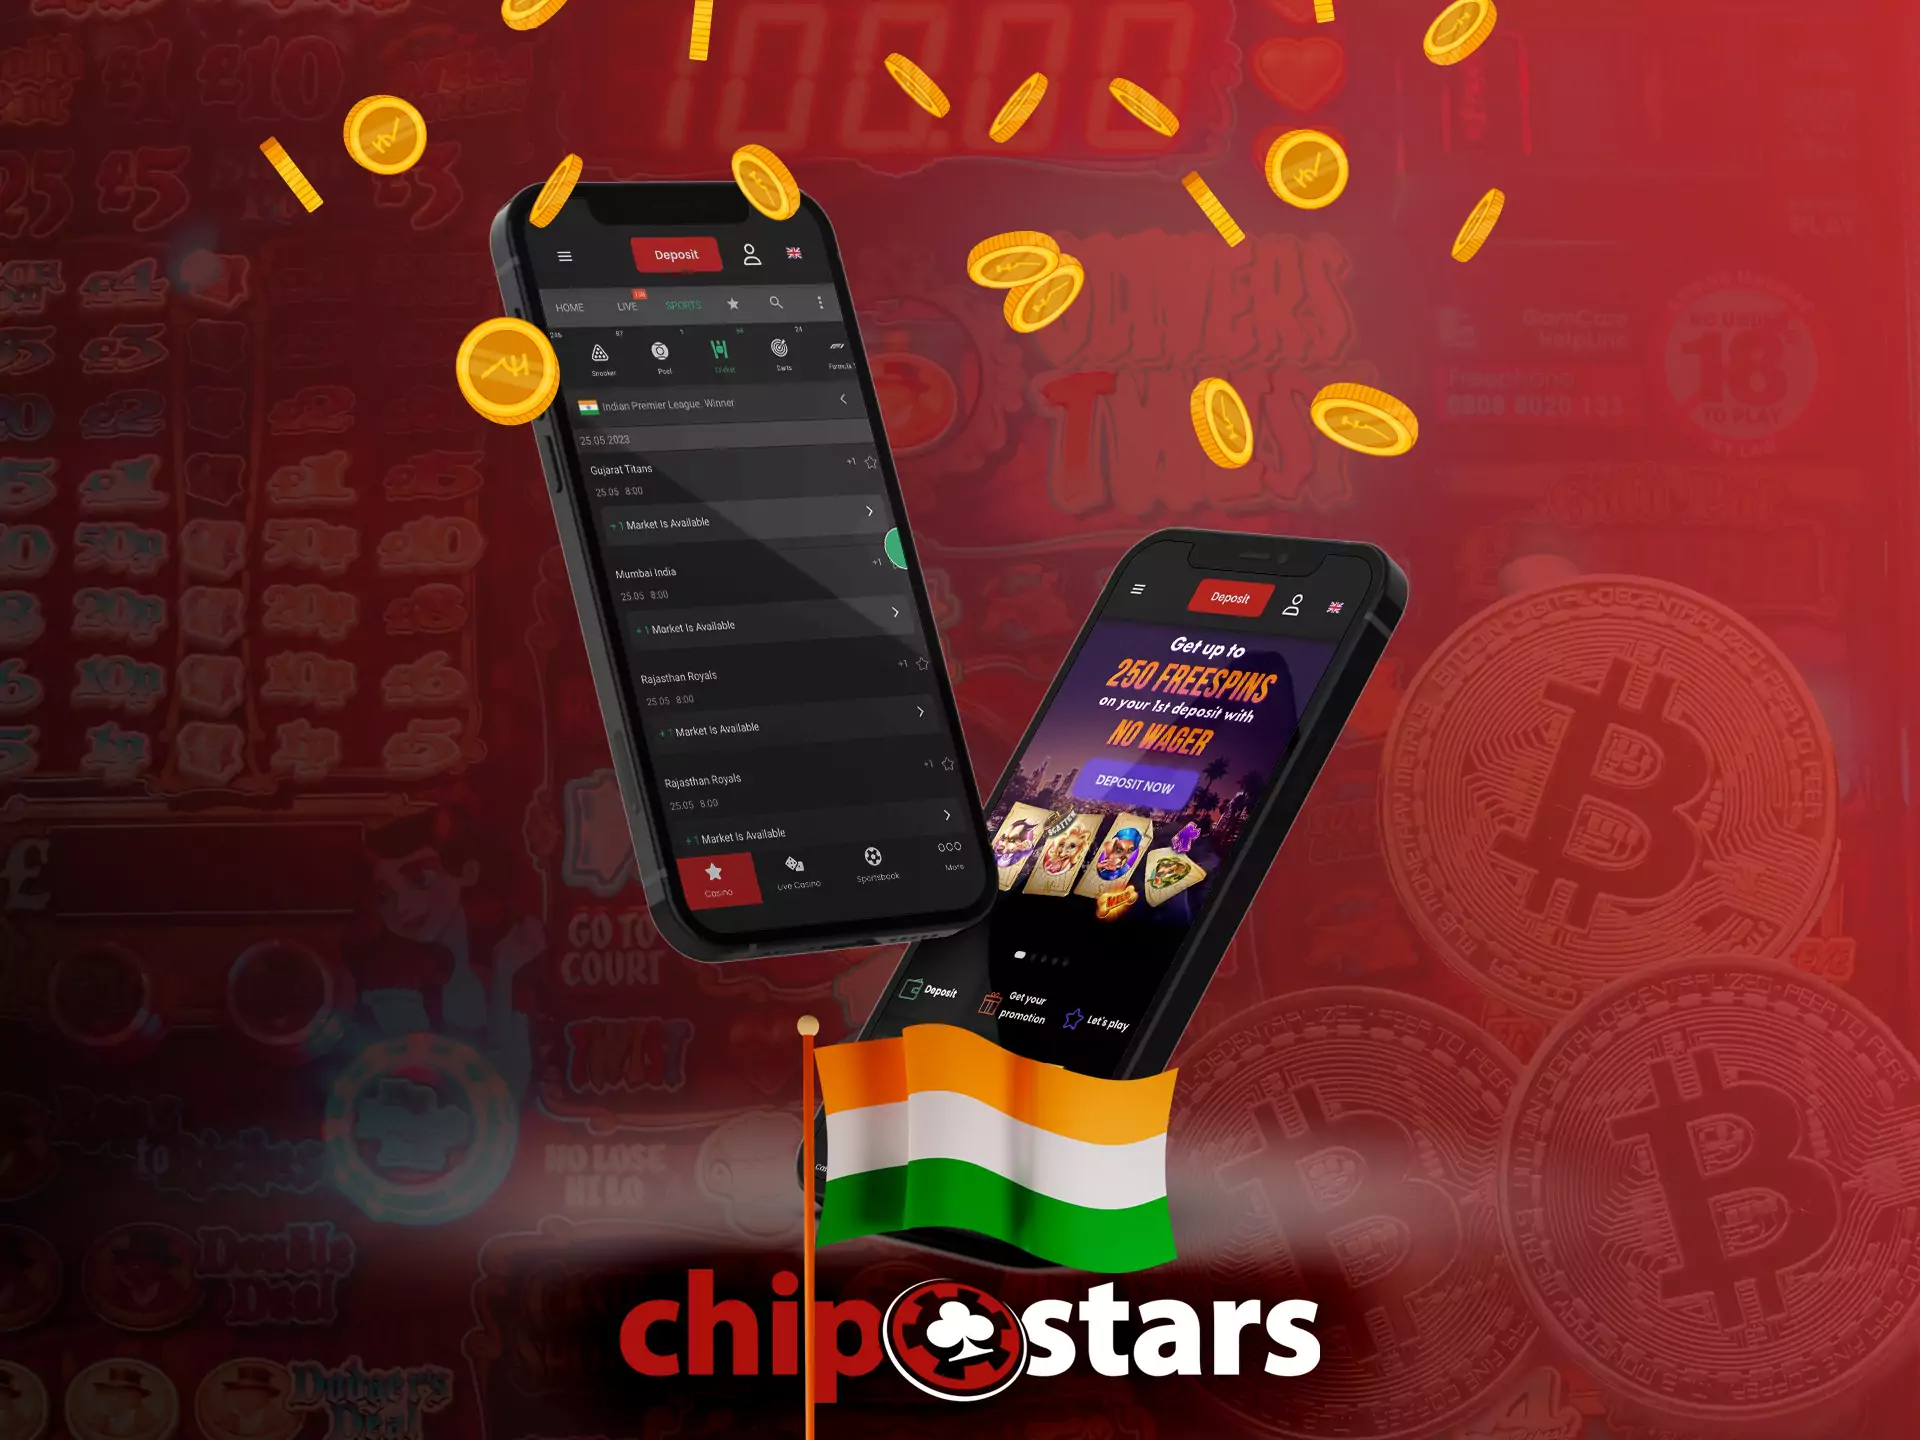 The Chipstars mobile website has a great design and is easy to use in a browser.